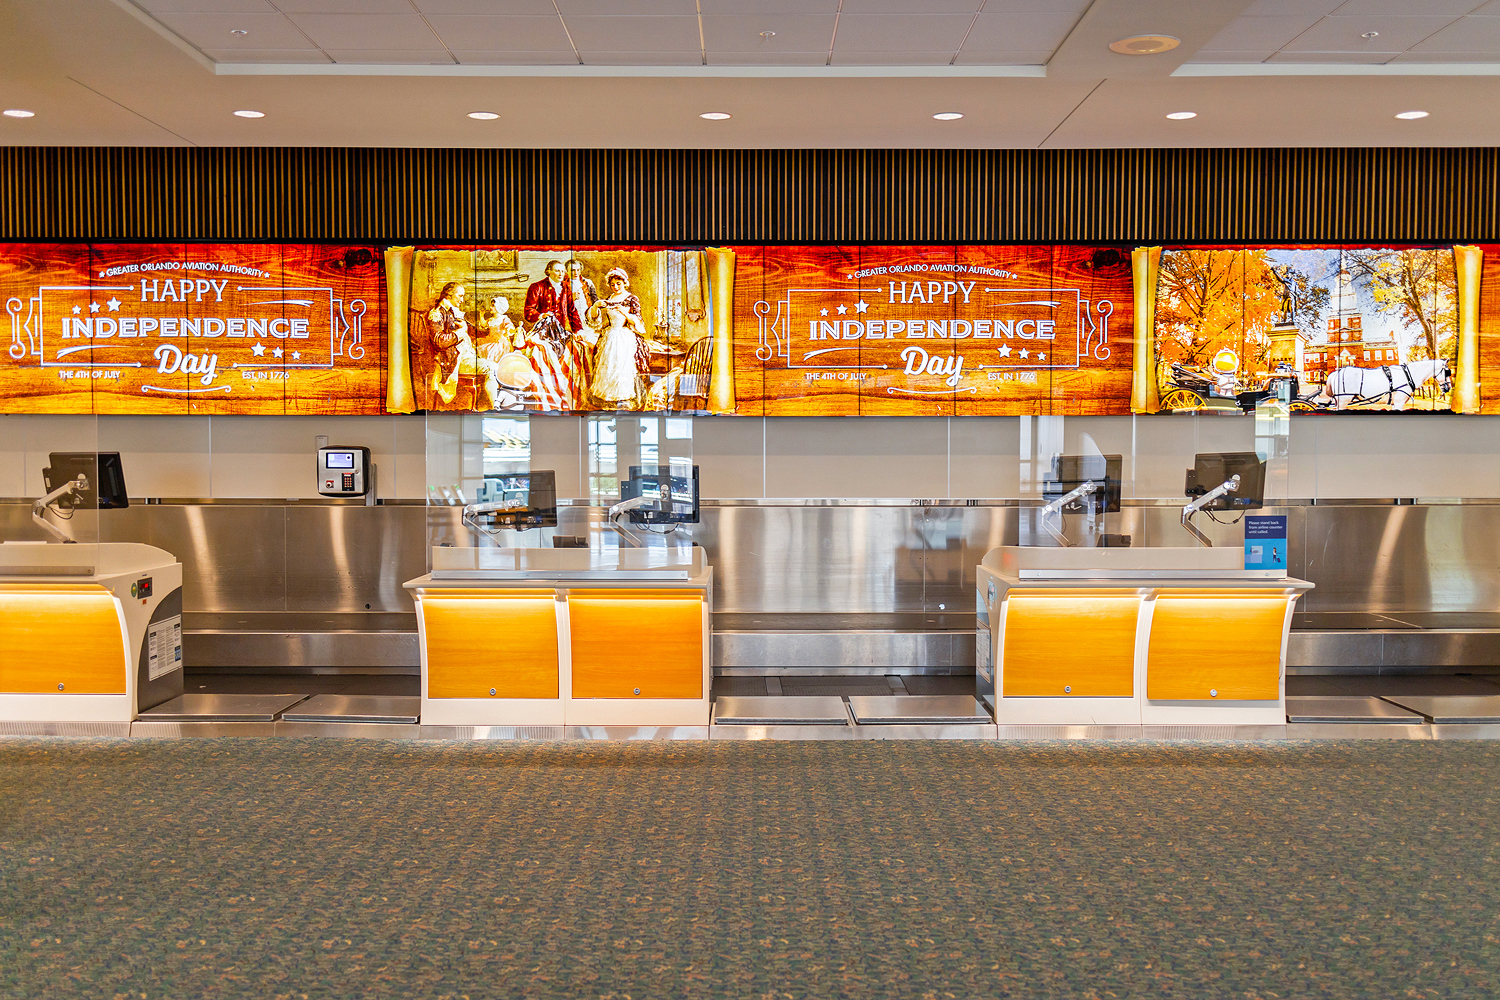 A videowall comprised of 700 synchronized screens creates a seamless canvas running behind the ticketing counters. It provides the flexibility to reassign ticketing counters among the 40 airlines according to demand and shows seasonal messages for unused counters.